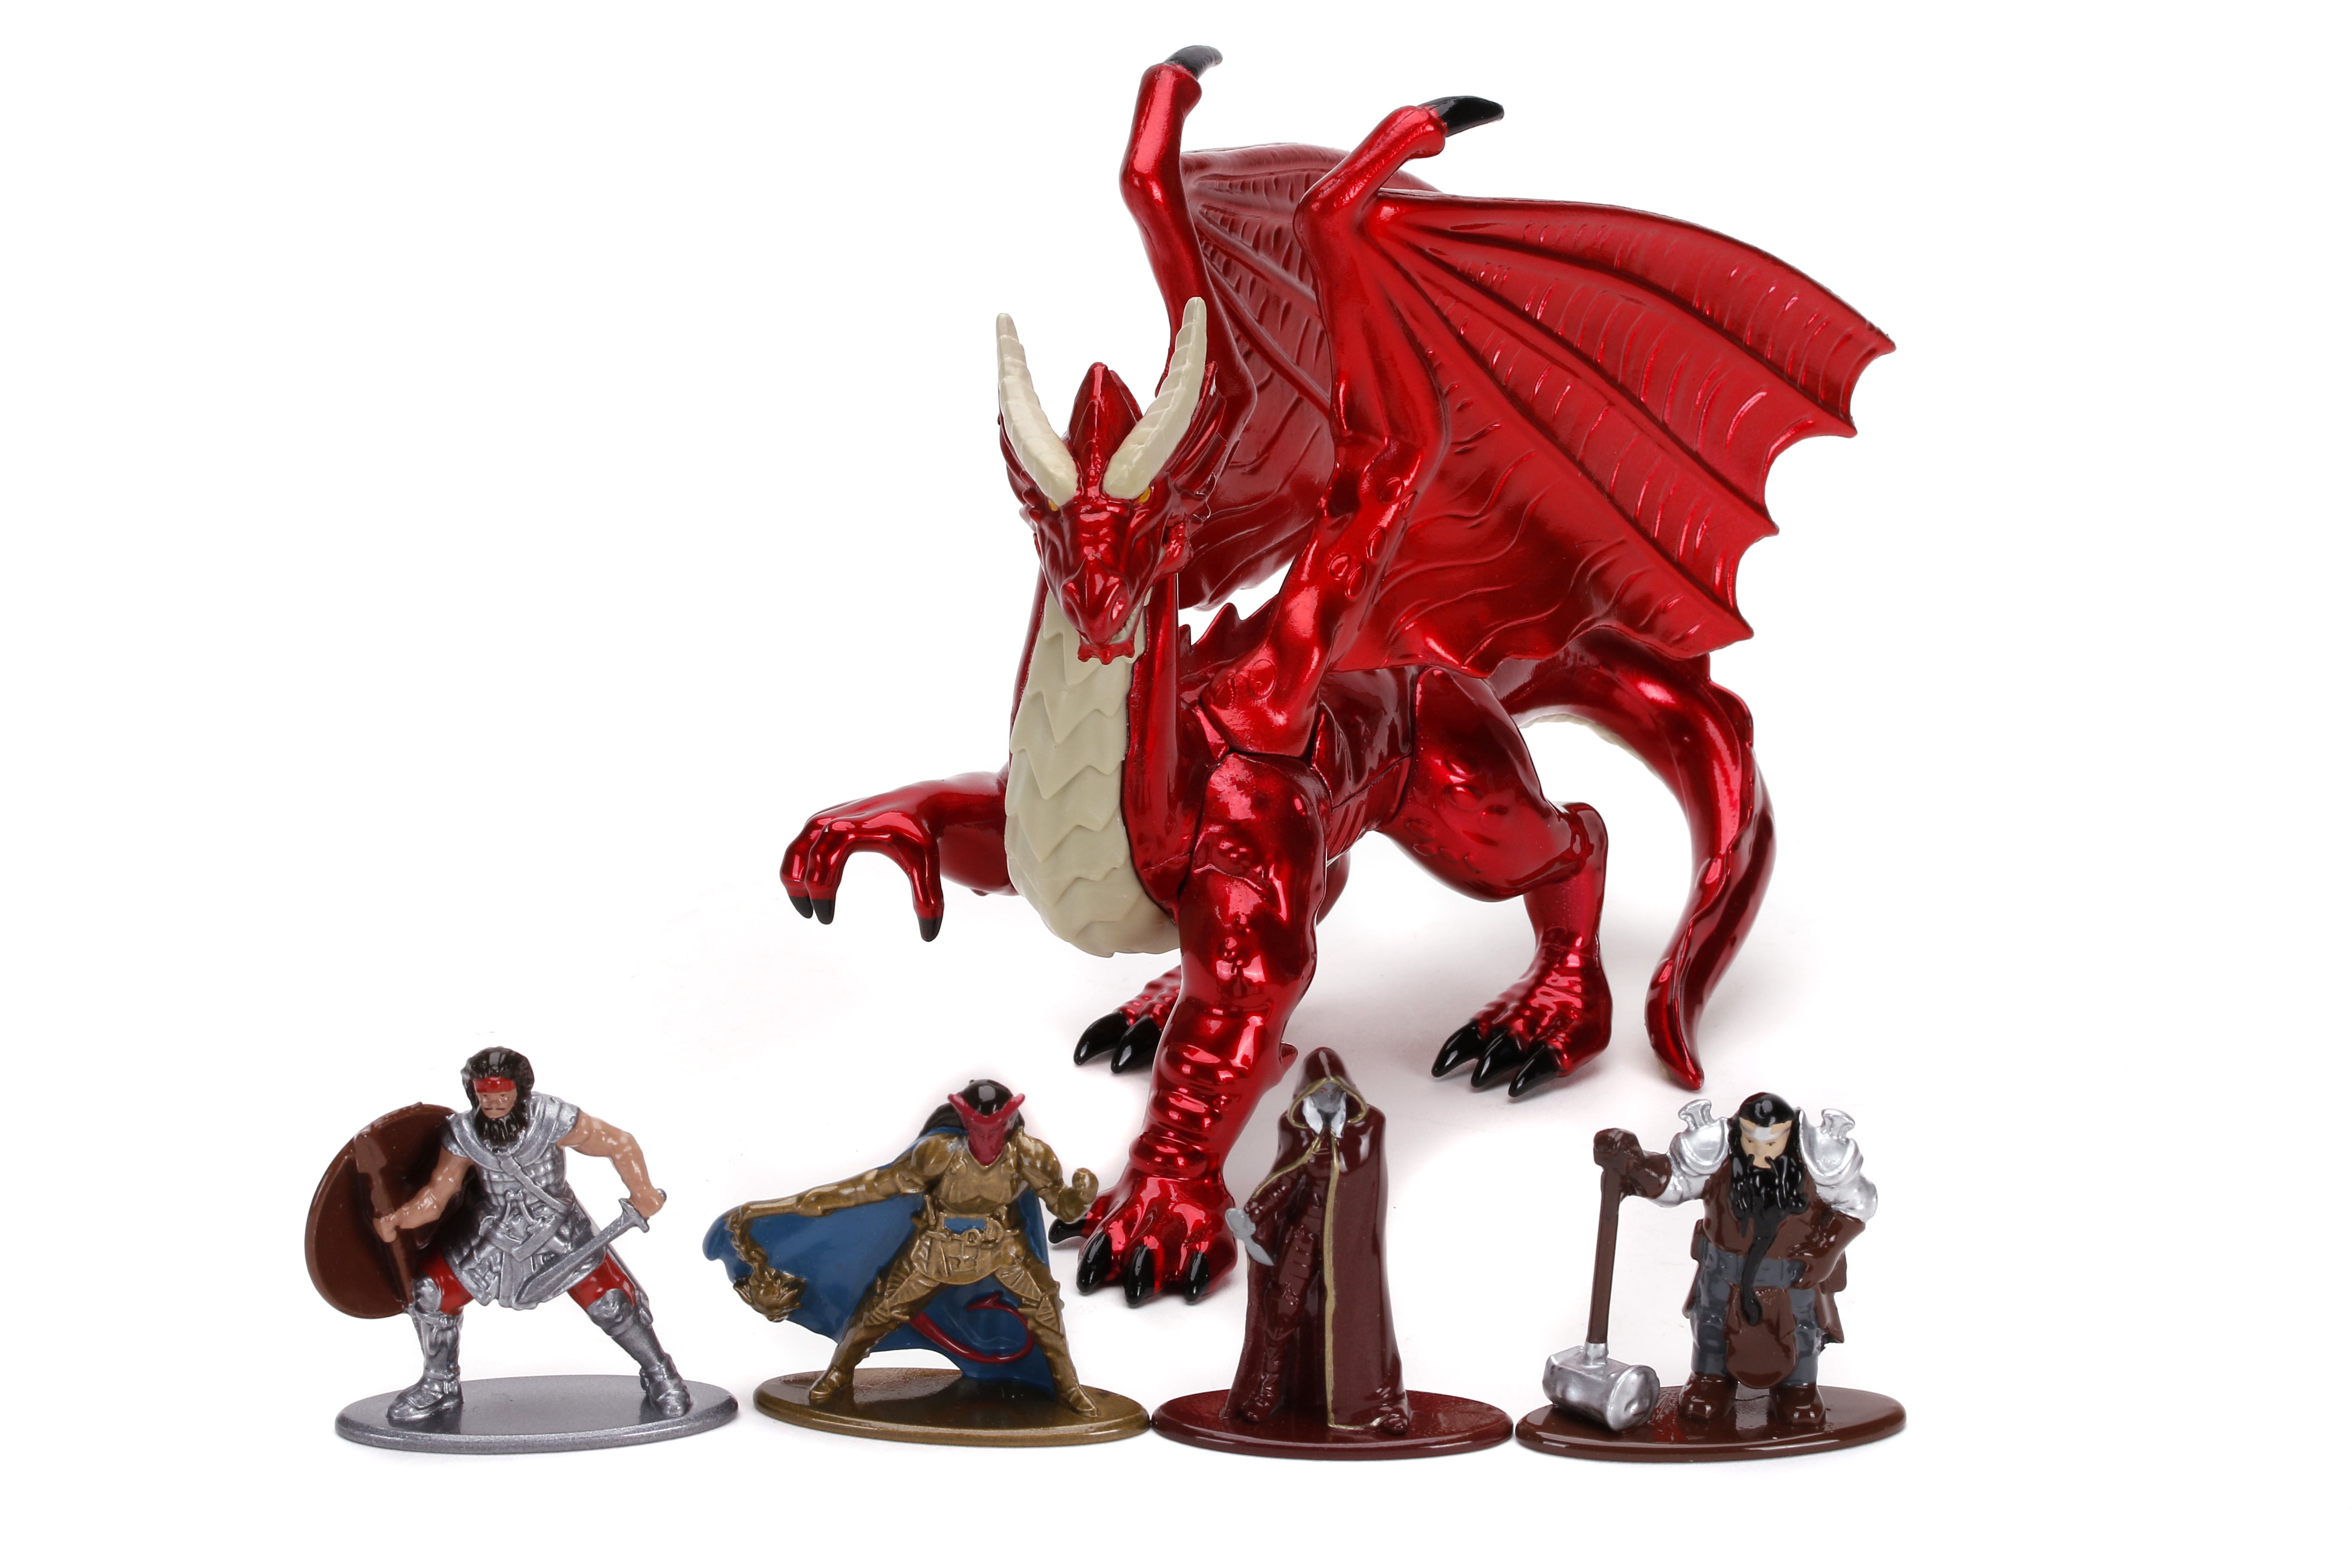 Random 10 Pcs Game Miniatures Figure For Dungeons & Dragon D&D Toys Xmas Gift